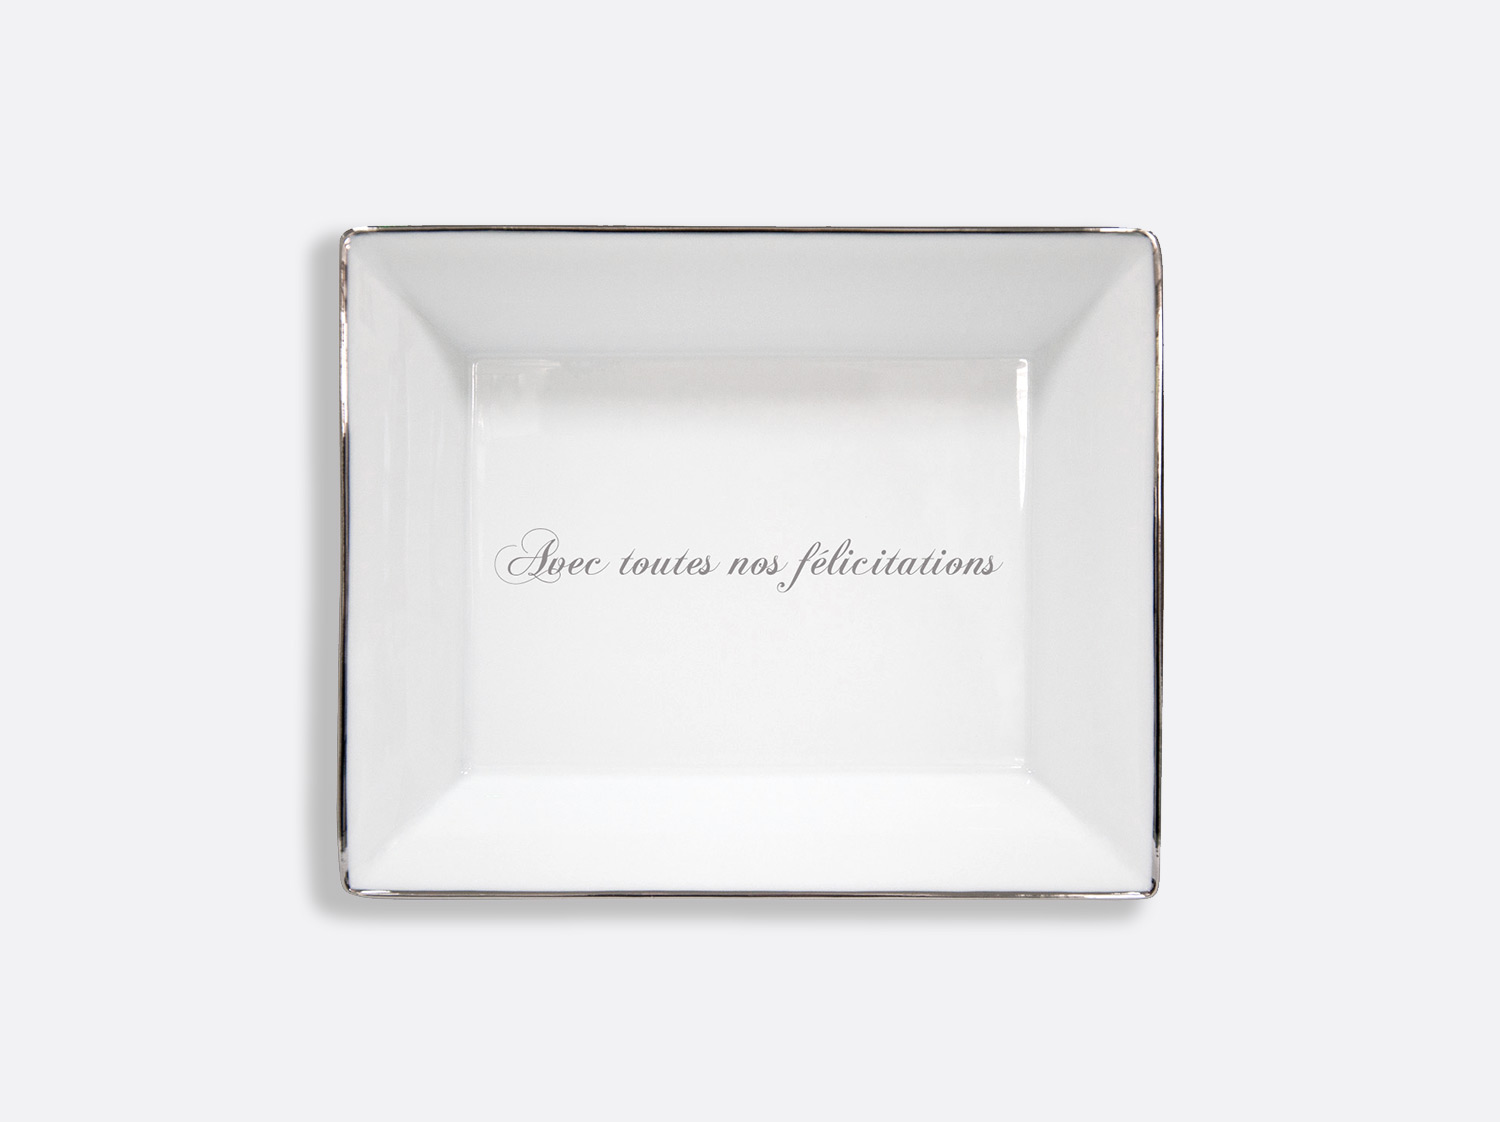 China Valet tray 7.9 x 6.3" of the collection Cristal - Personnalisation | Bernardaud